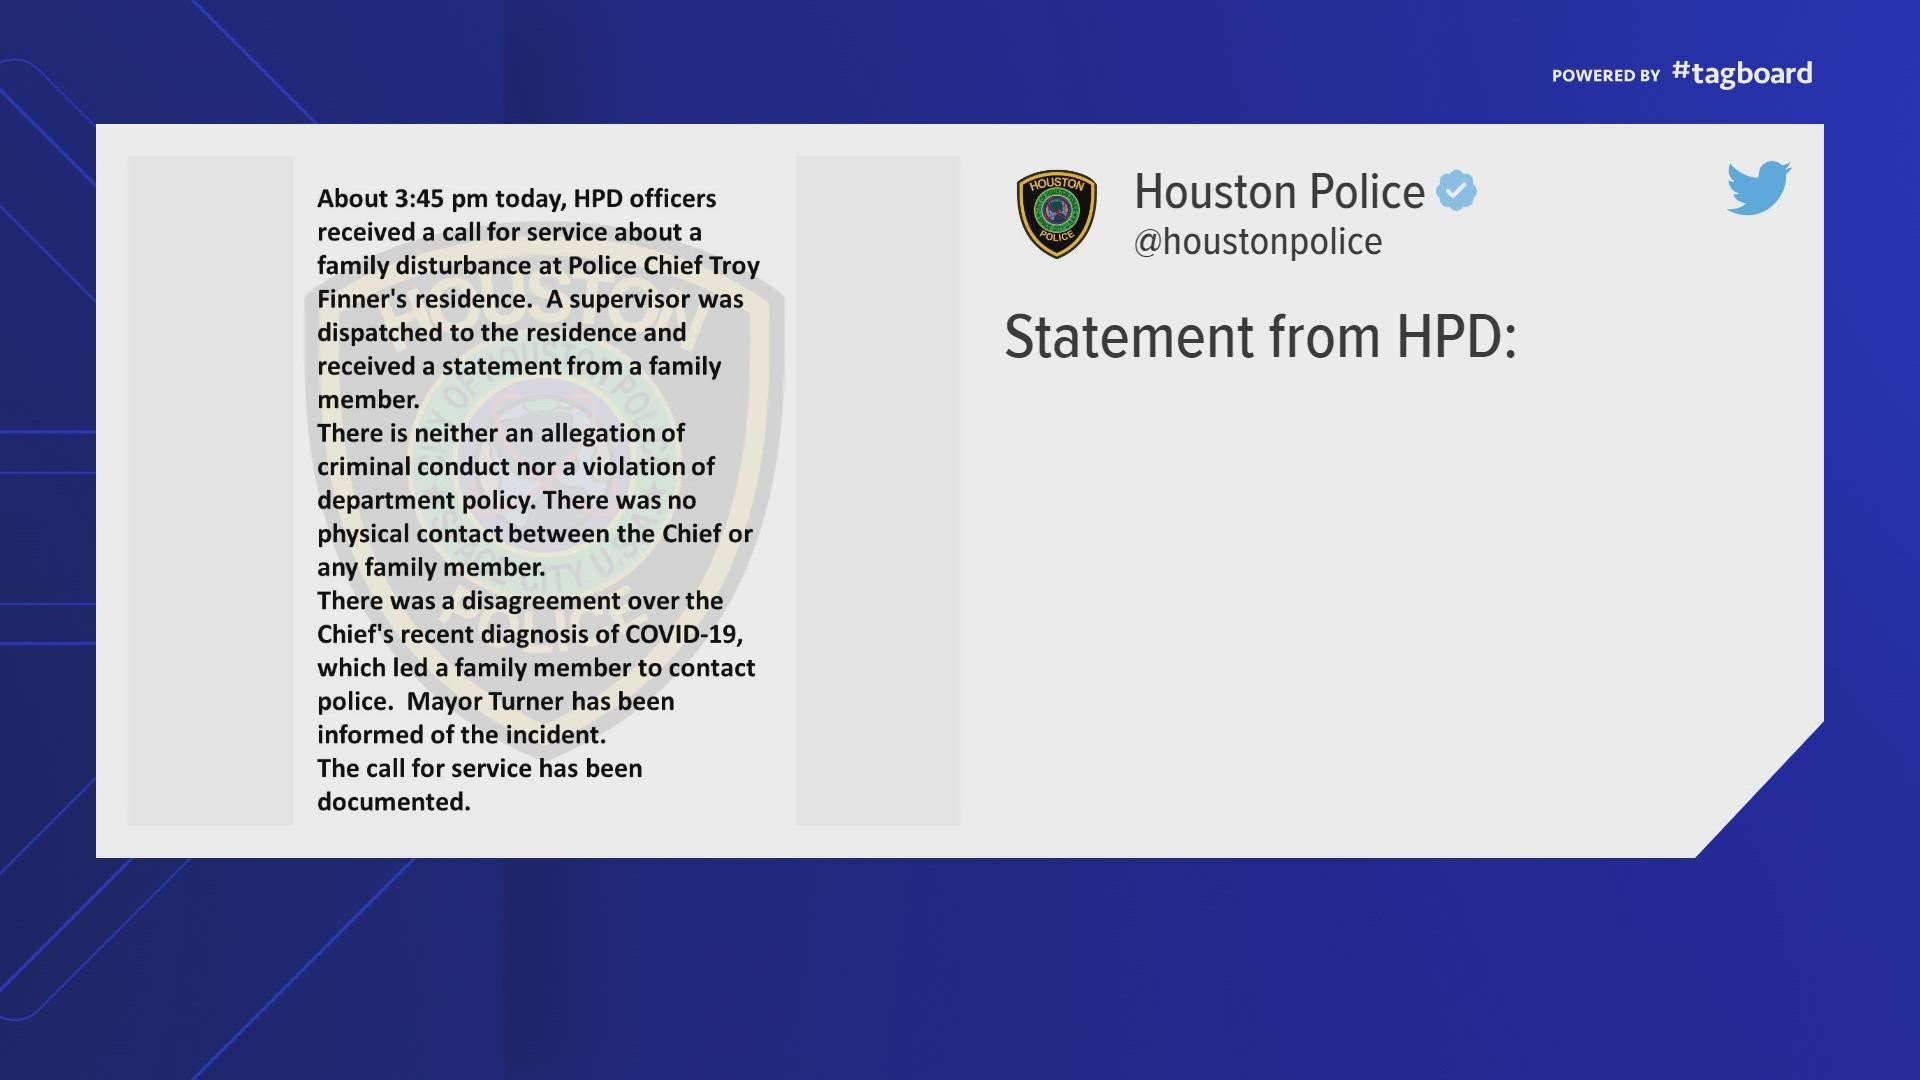 The Houston Police Department on Saturday issued a statement on Twitter regarding a family disturbance call at Police Chief Troy Finner's residence.